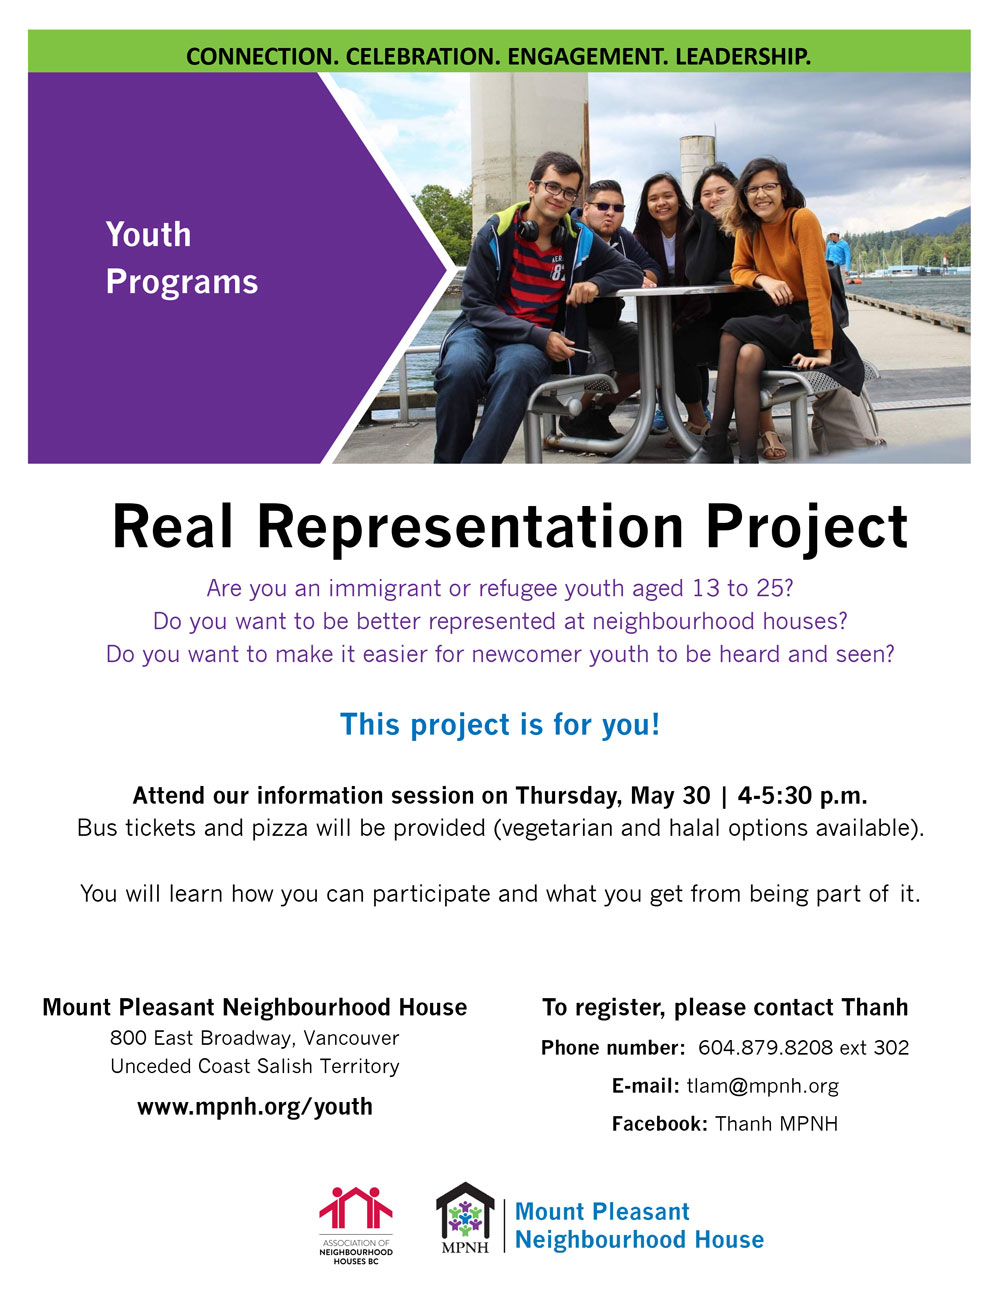 An image of the poster with event details, along with a photo of culturally diverse youth and leaders at an outdoor picnic table.